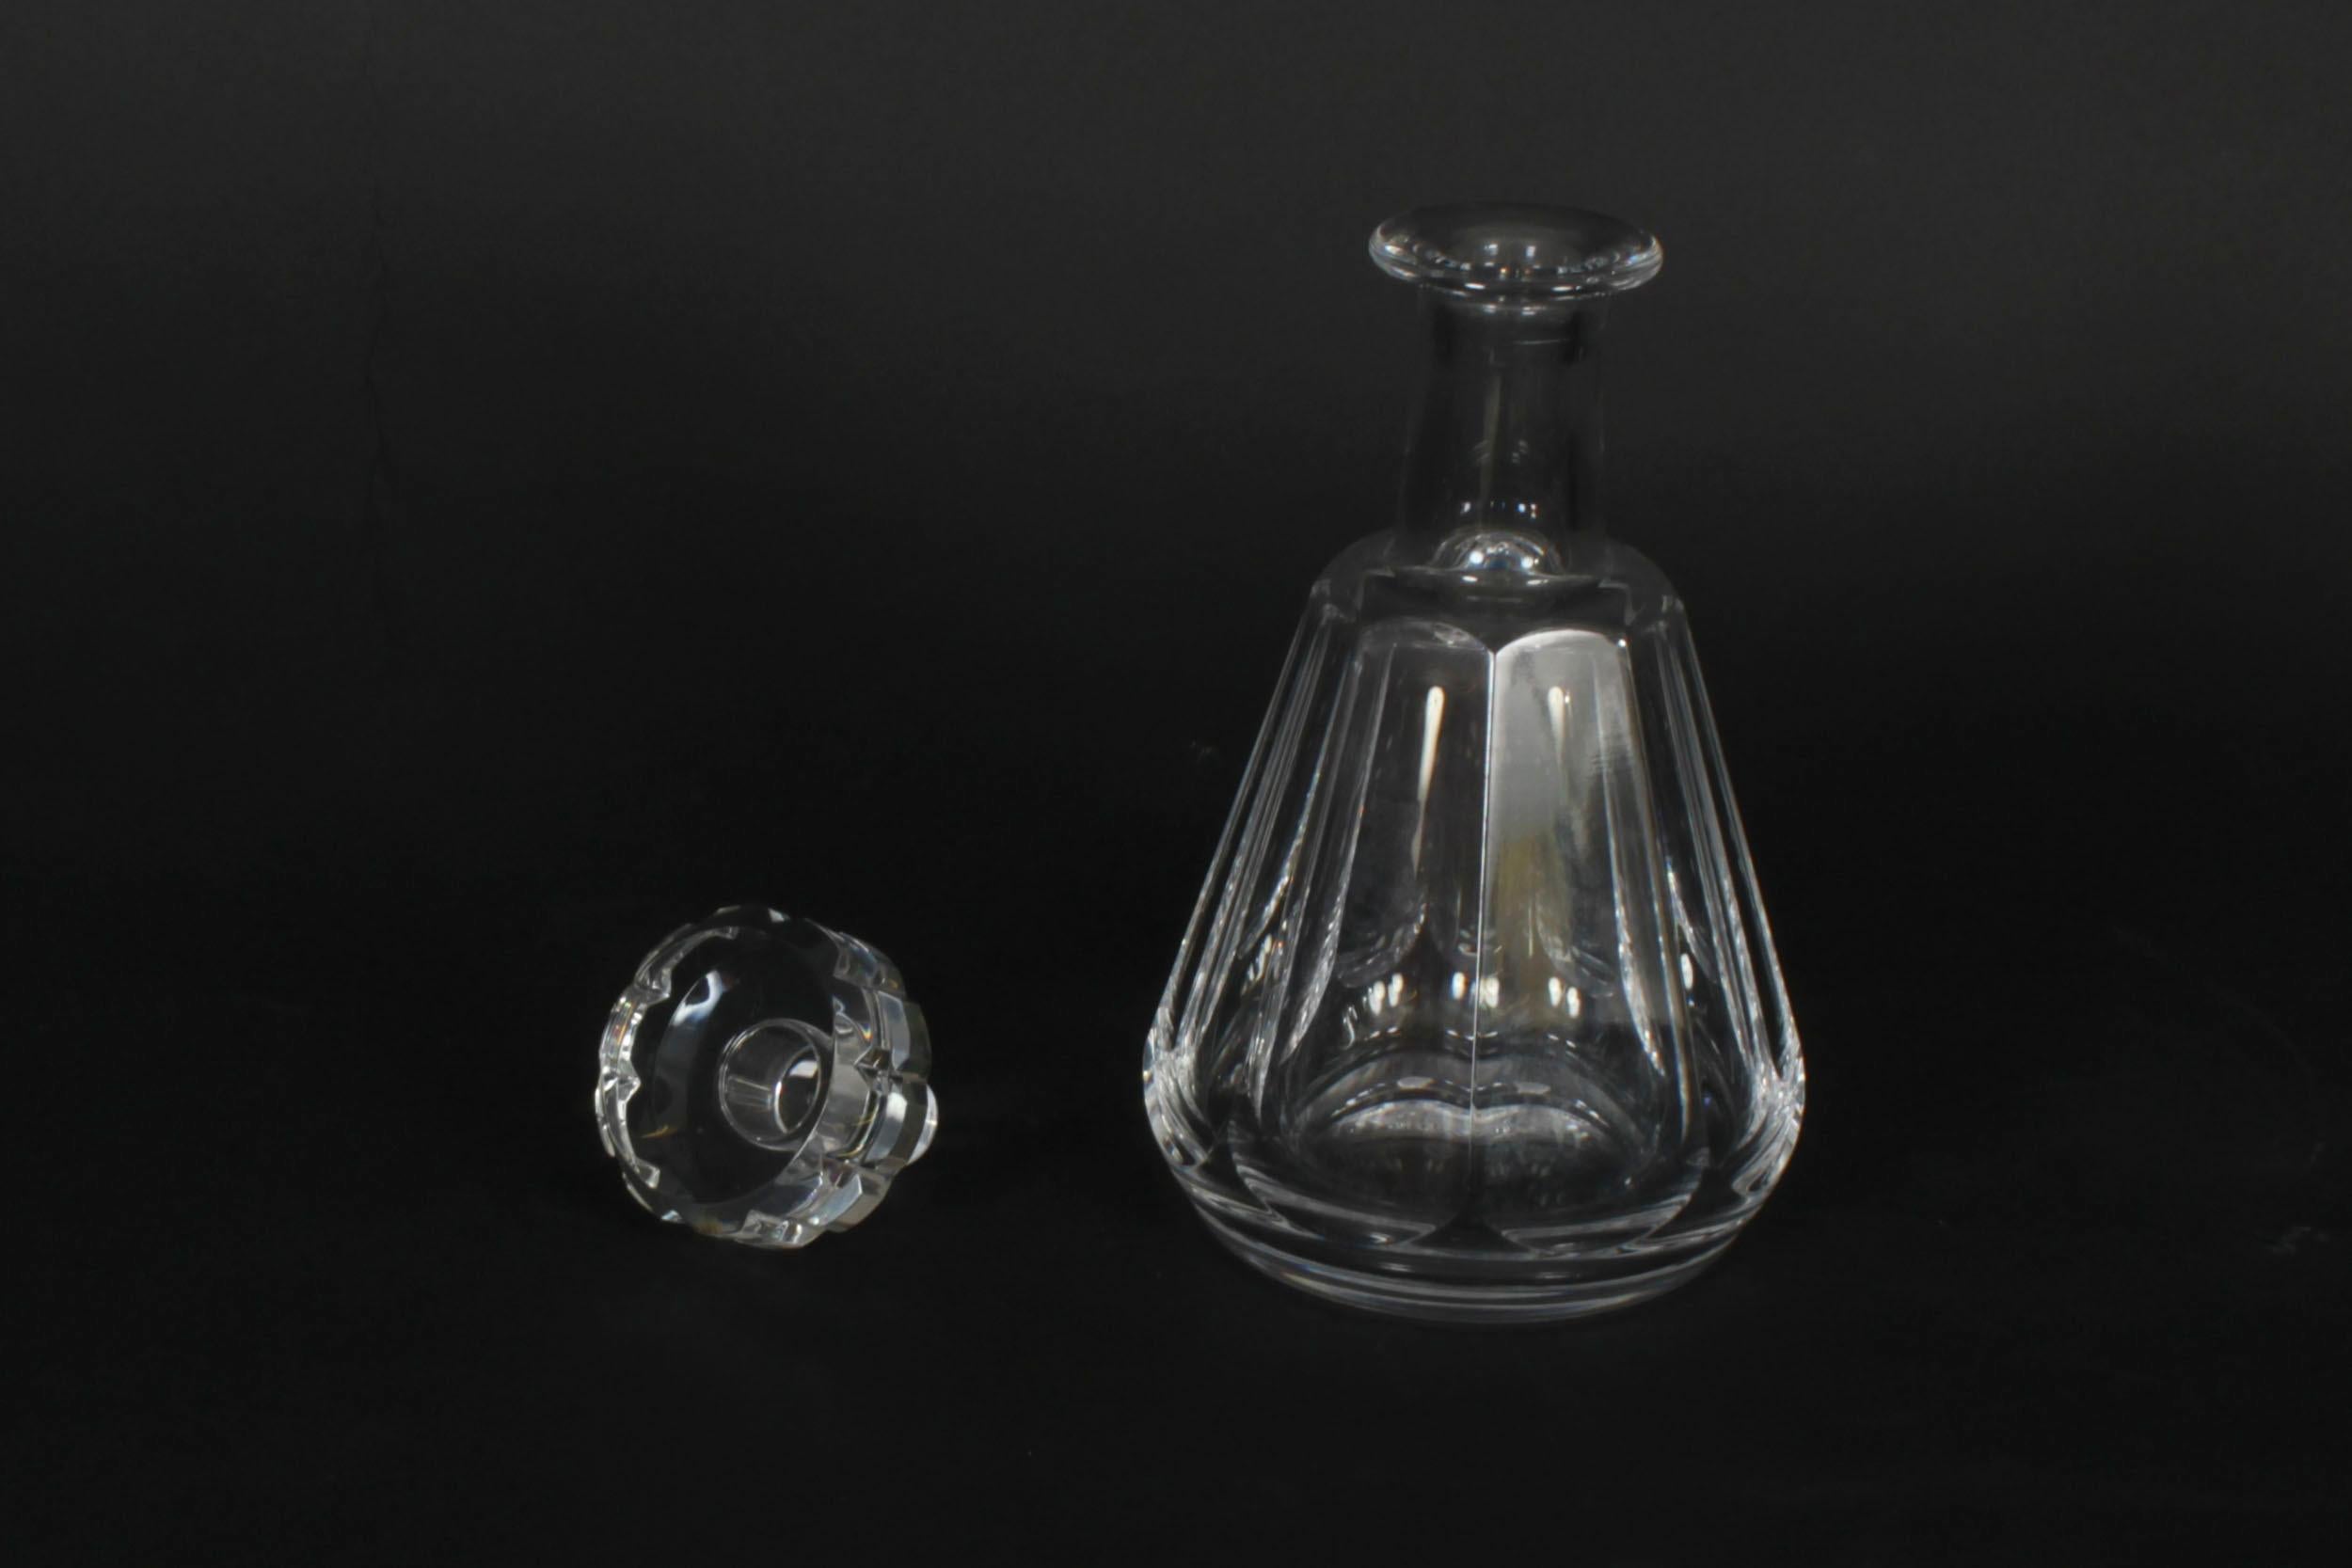 Cut Glass Vintage Pair of Harcourt Talleyrand Crystal Decanters by Baccarat Mid 20th C For Sale